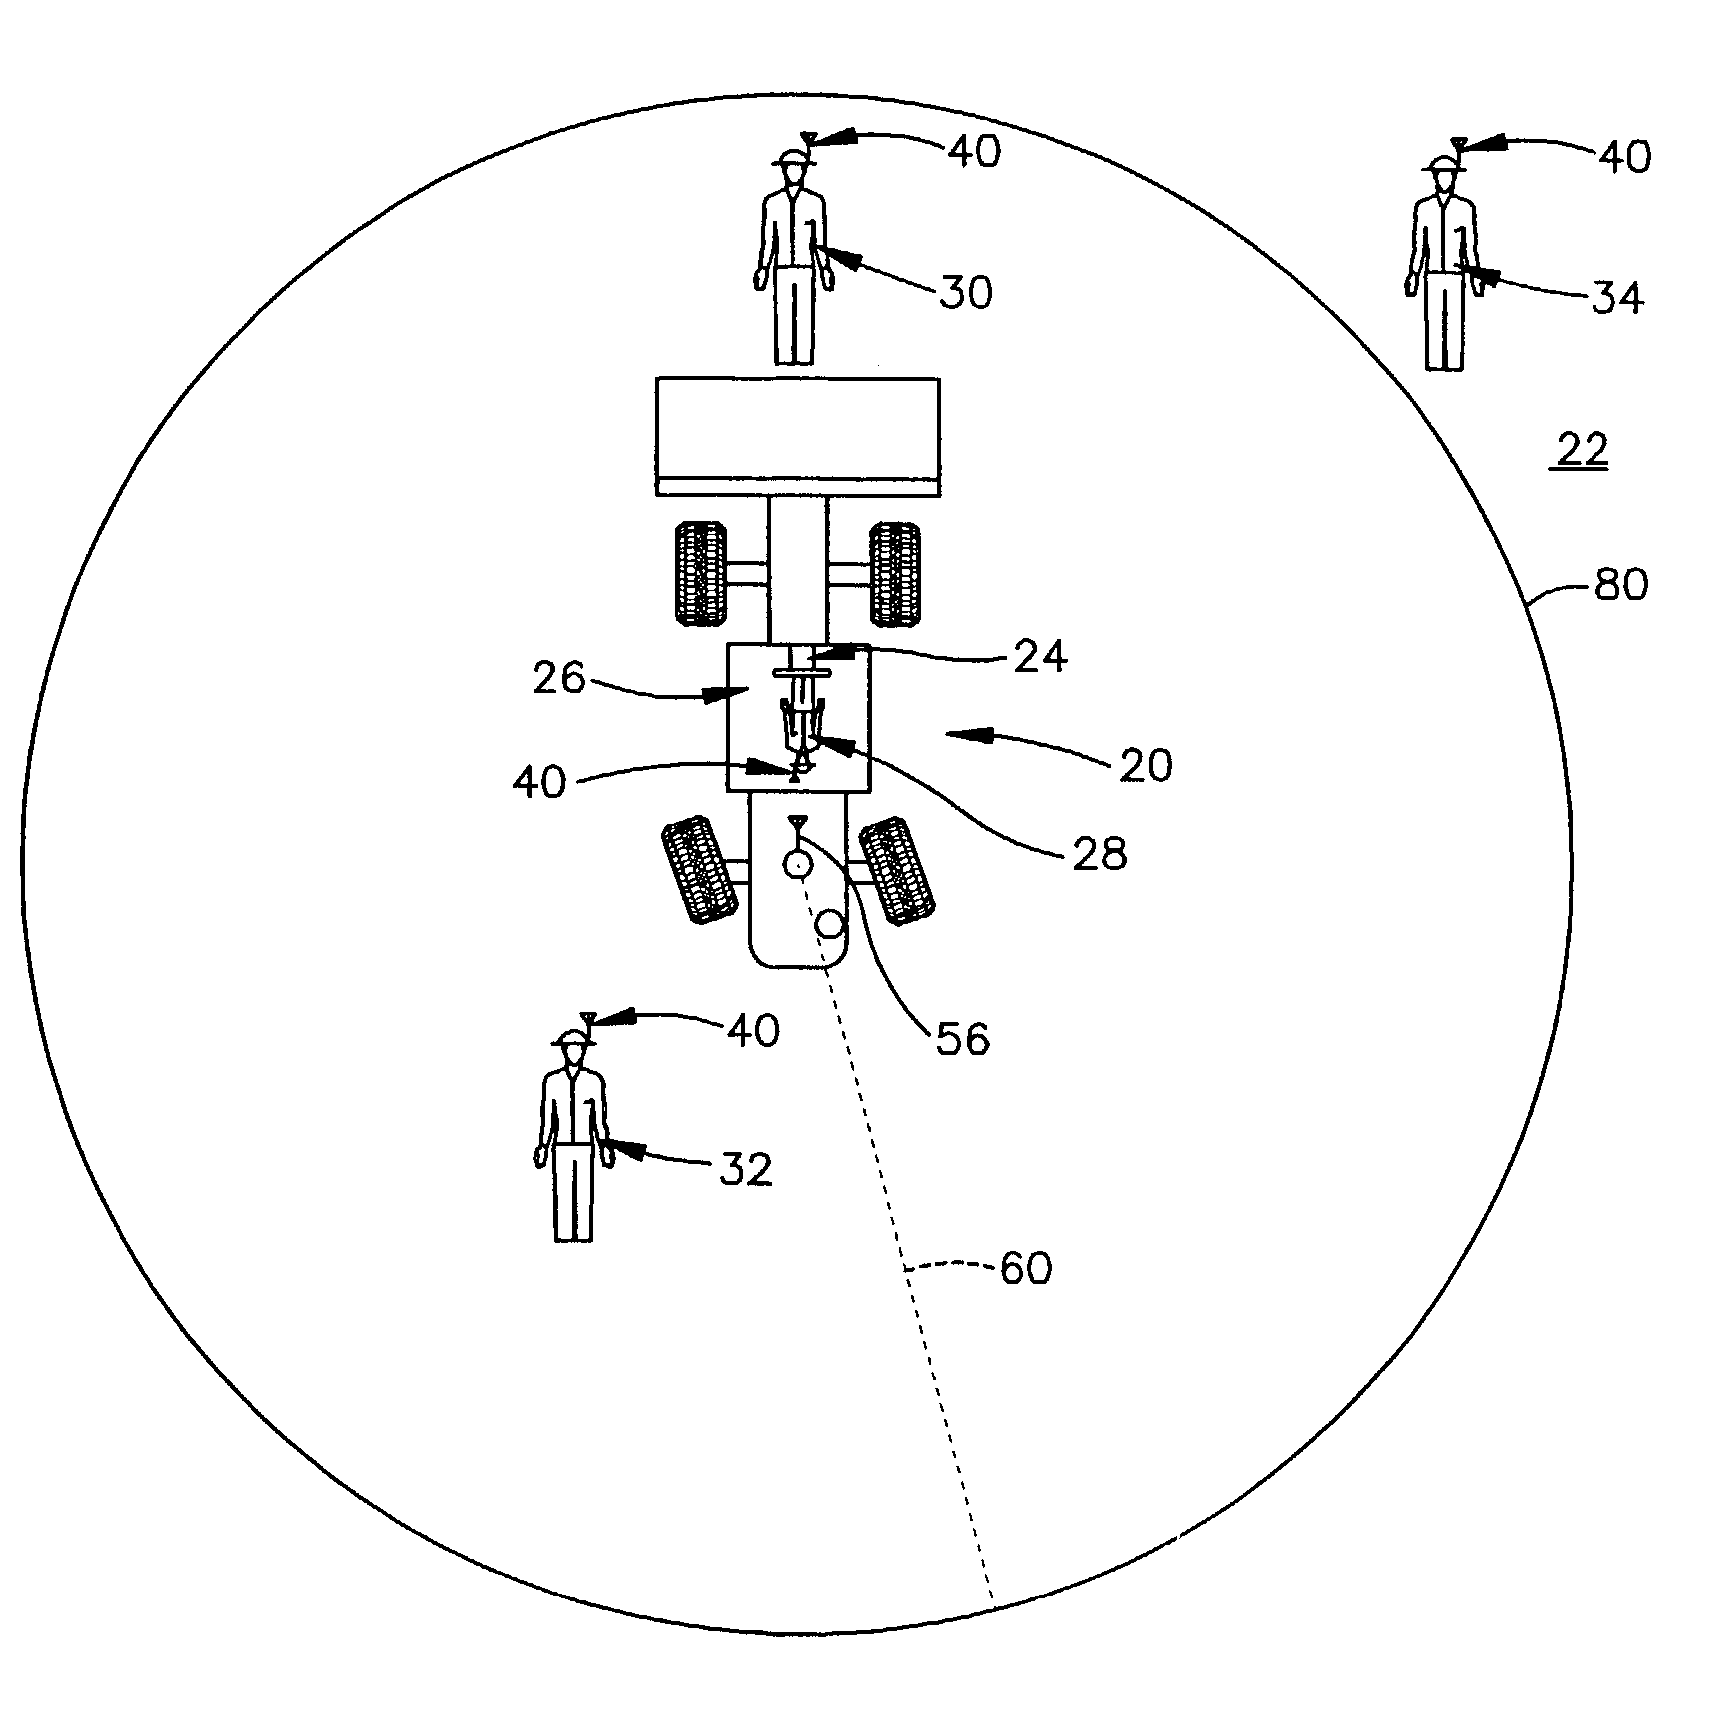 Method and apparatus for enhancing safety within a work zone